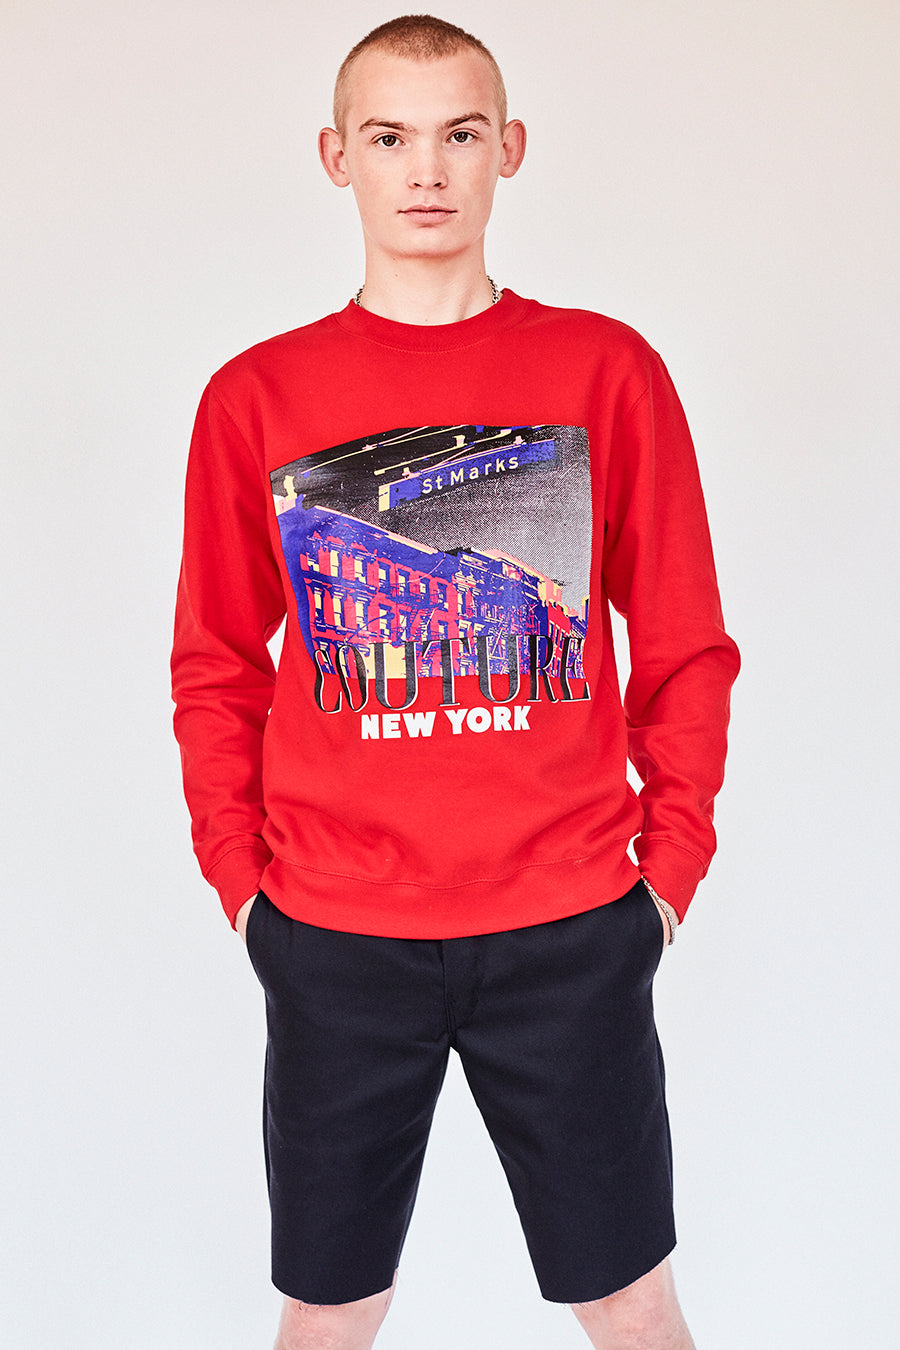 Brand New from New York City: Stmarksnewyork.com  Shop the St. Marks Street Sign red sweatshirt: Featuring St. Marks Street sign image on the front and St. Marks Couture New York logo on the back.  Hand silkscreen printed in New York with love.